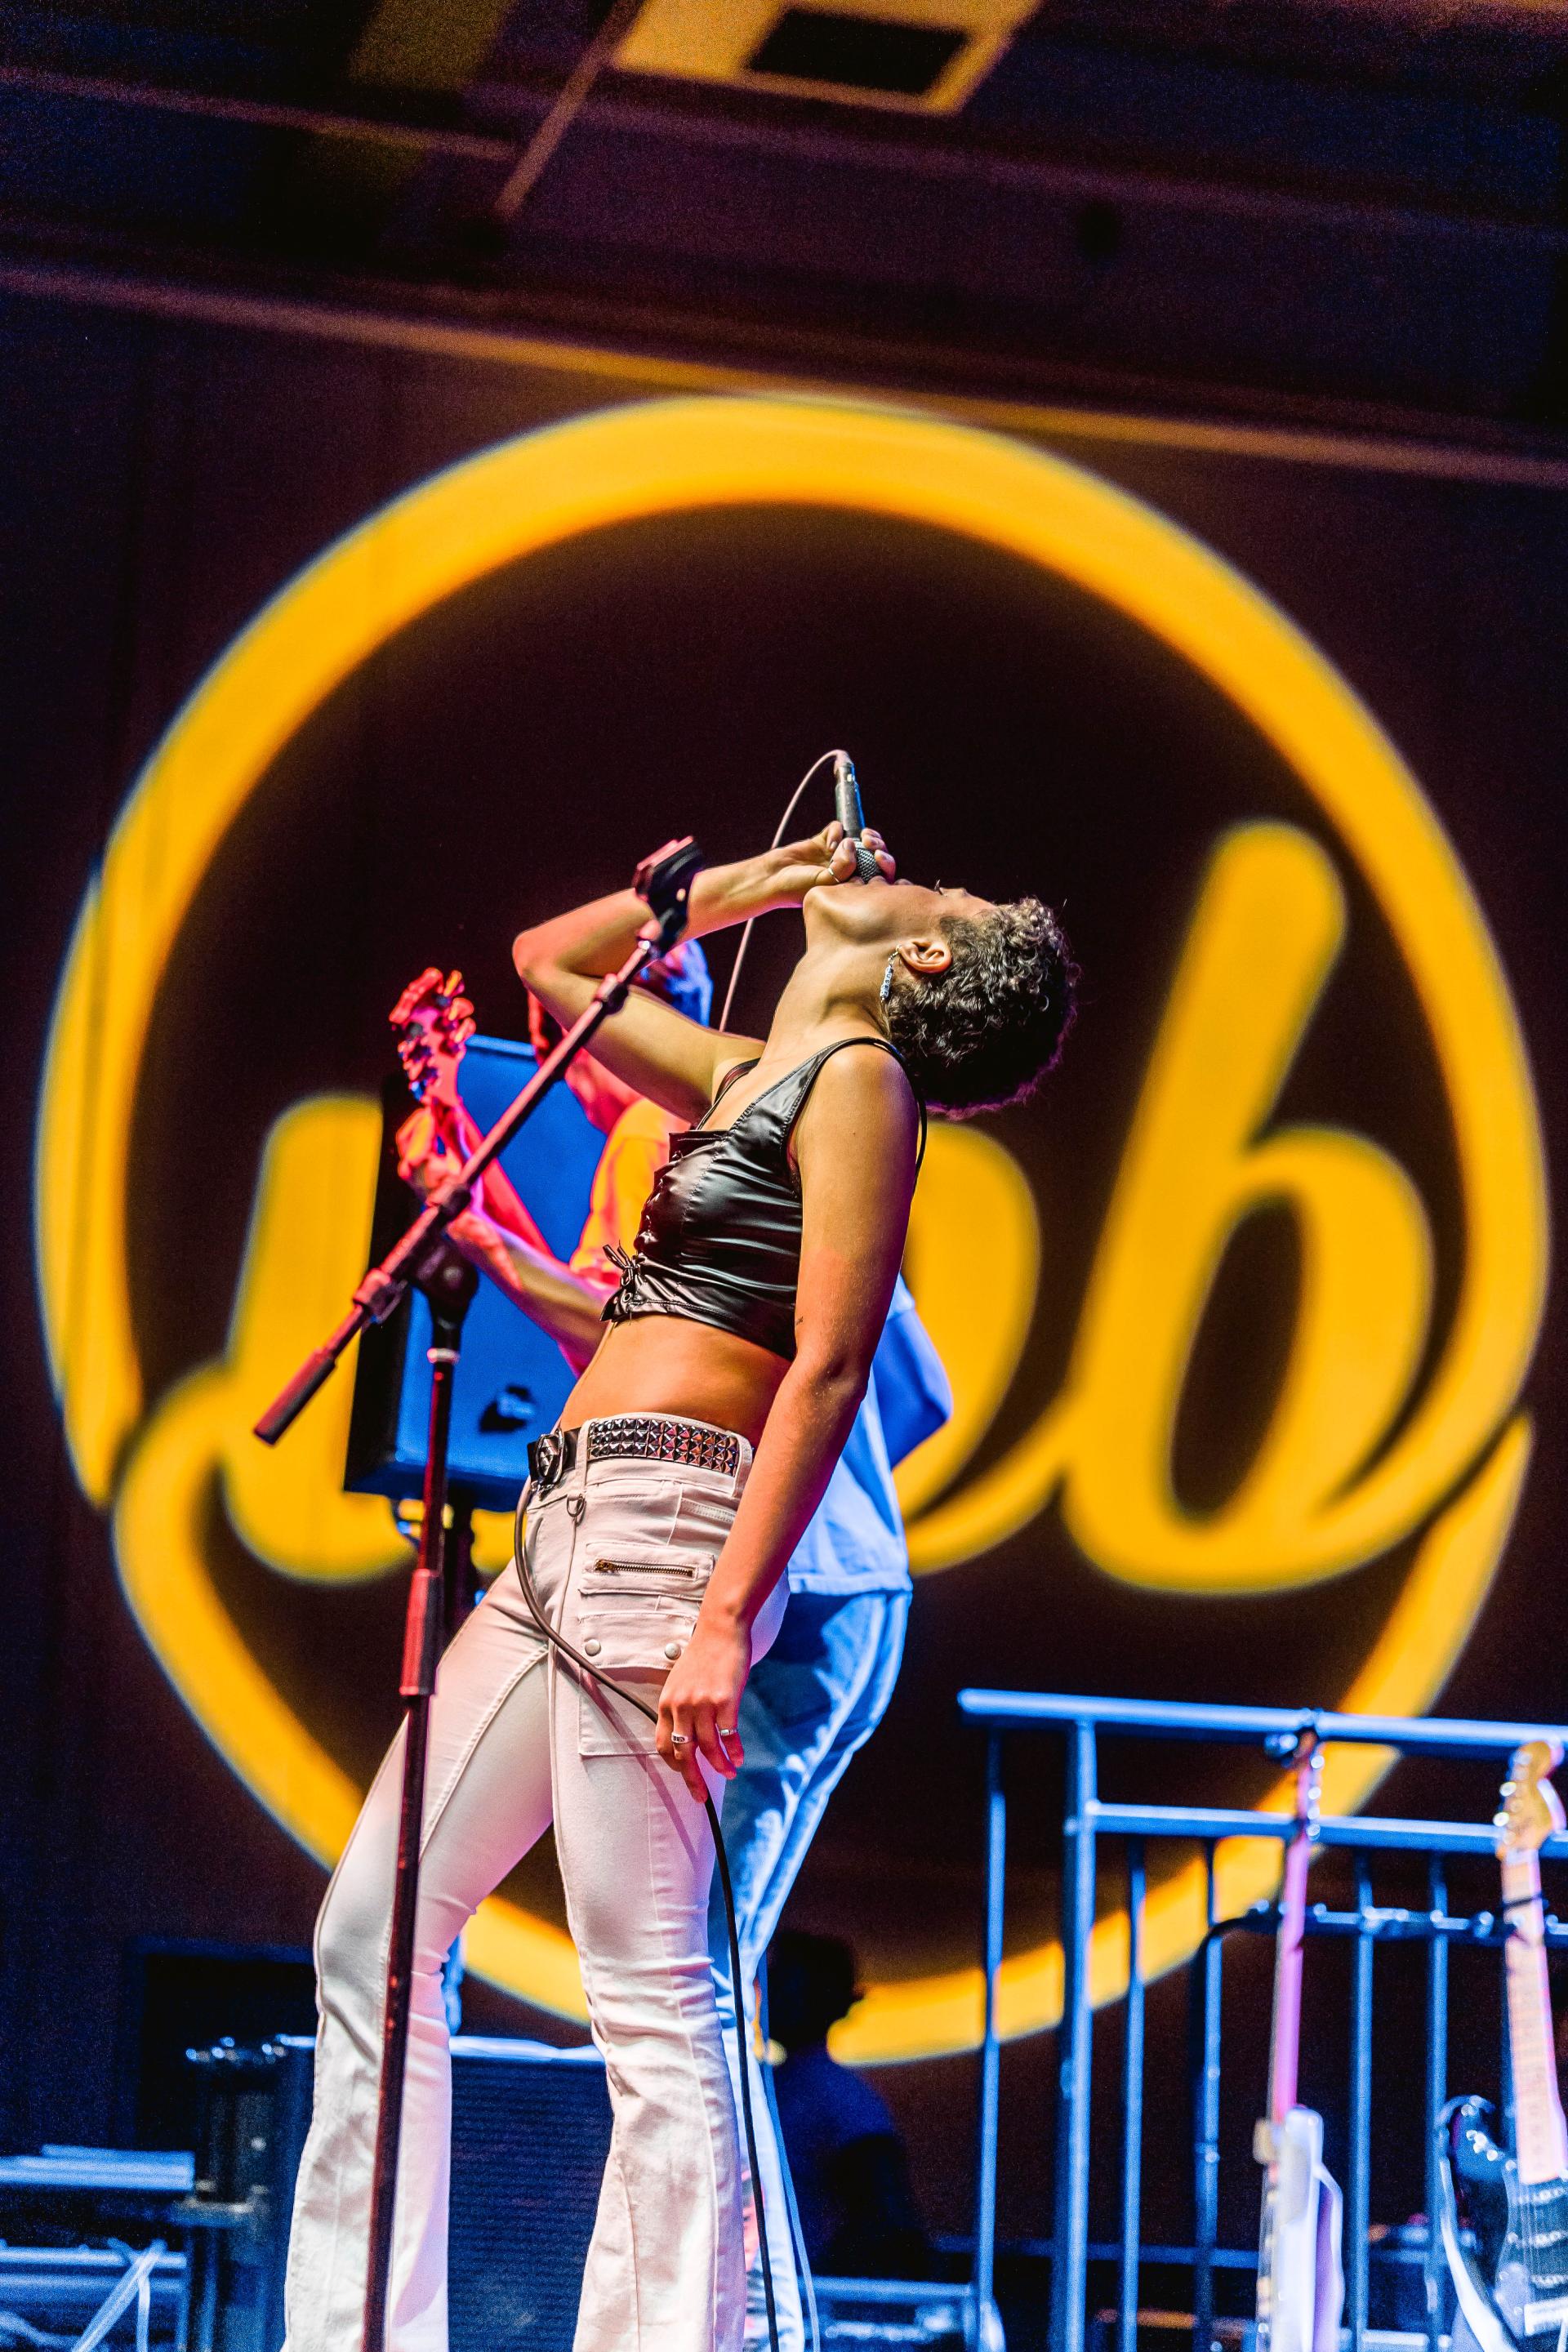 Photo of a singer leaning her head and body backwards while singing passionately into a microphone, with a large yellow glowing University Program Board logo displaying on the wall behind her at FallFest